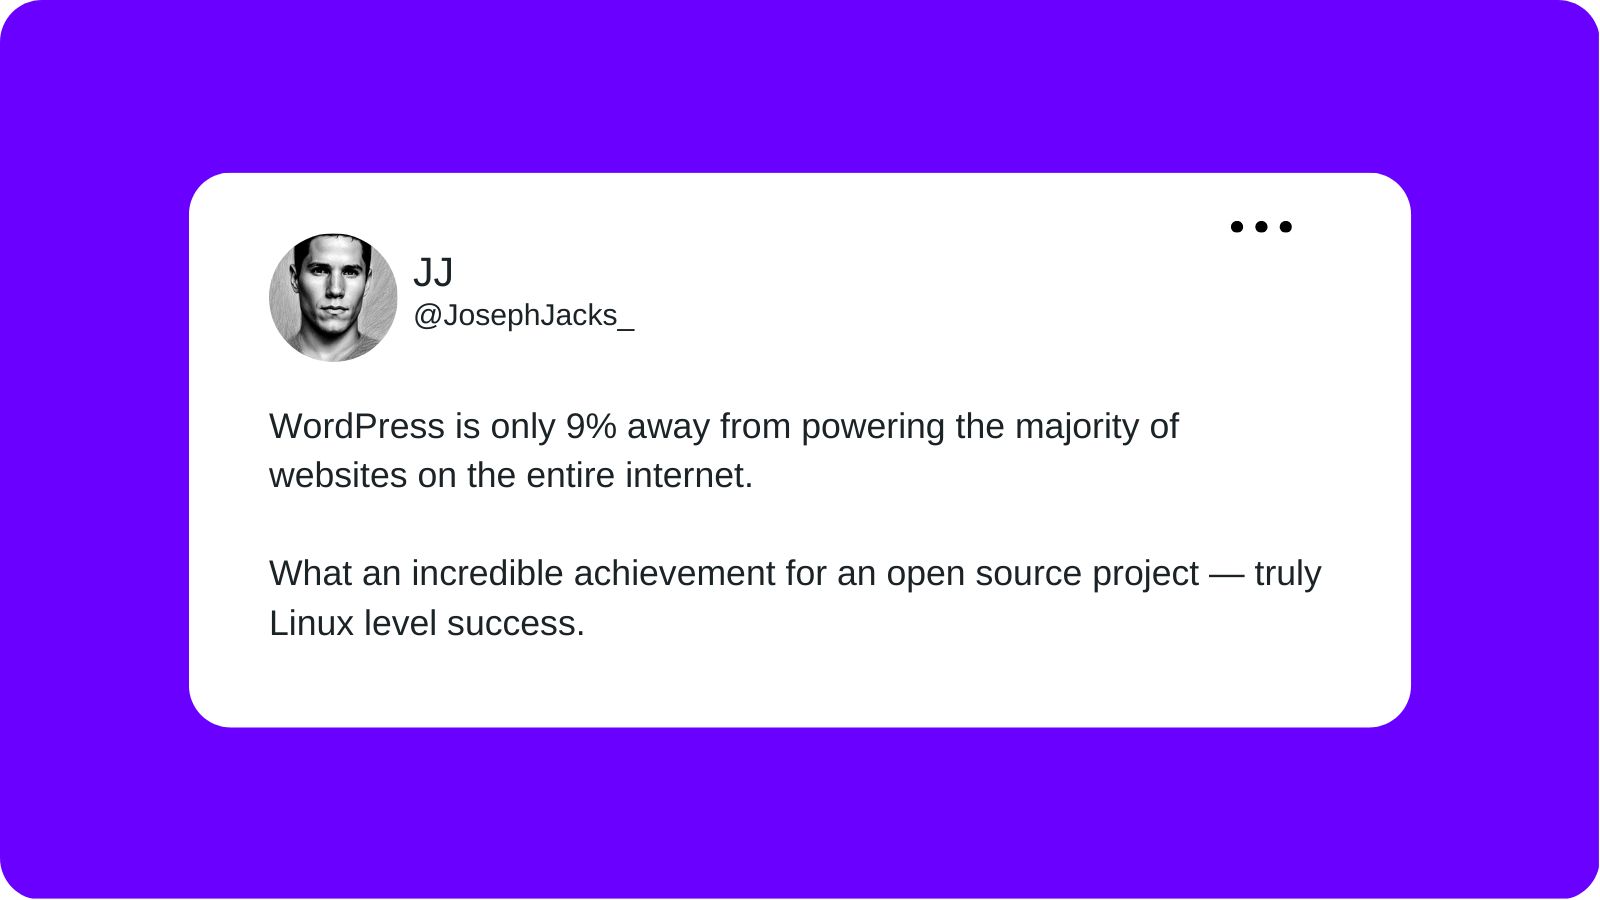 A tweet from Joseph Jacks layered over a purple background that reads "WordPress is only 9% away from powering the majority of websites on the entire internet. What an incredible achievement for an open source project, truly Linux level success."